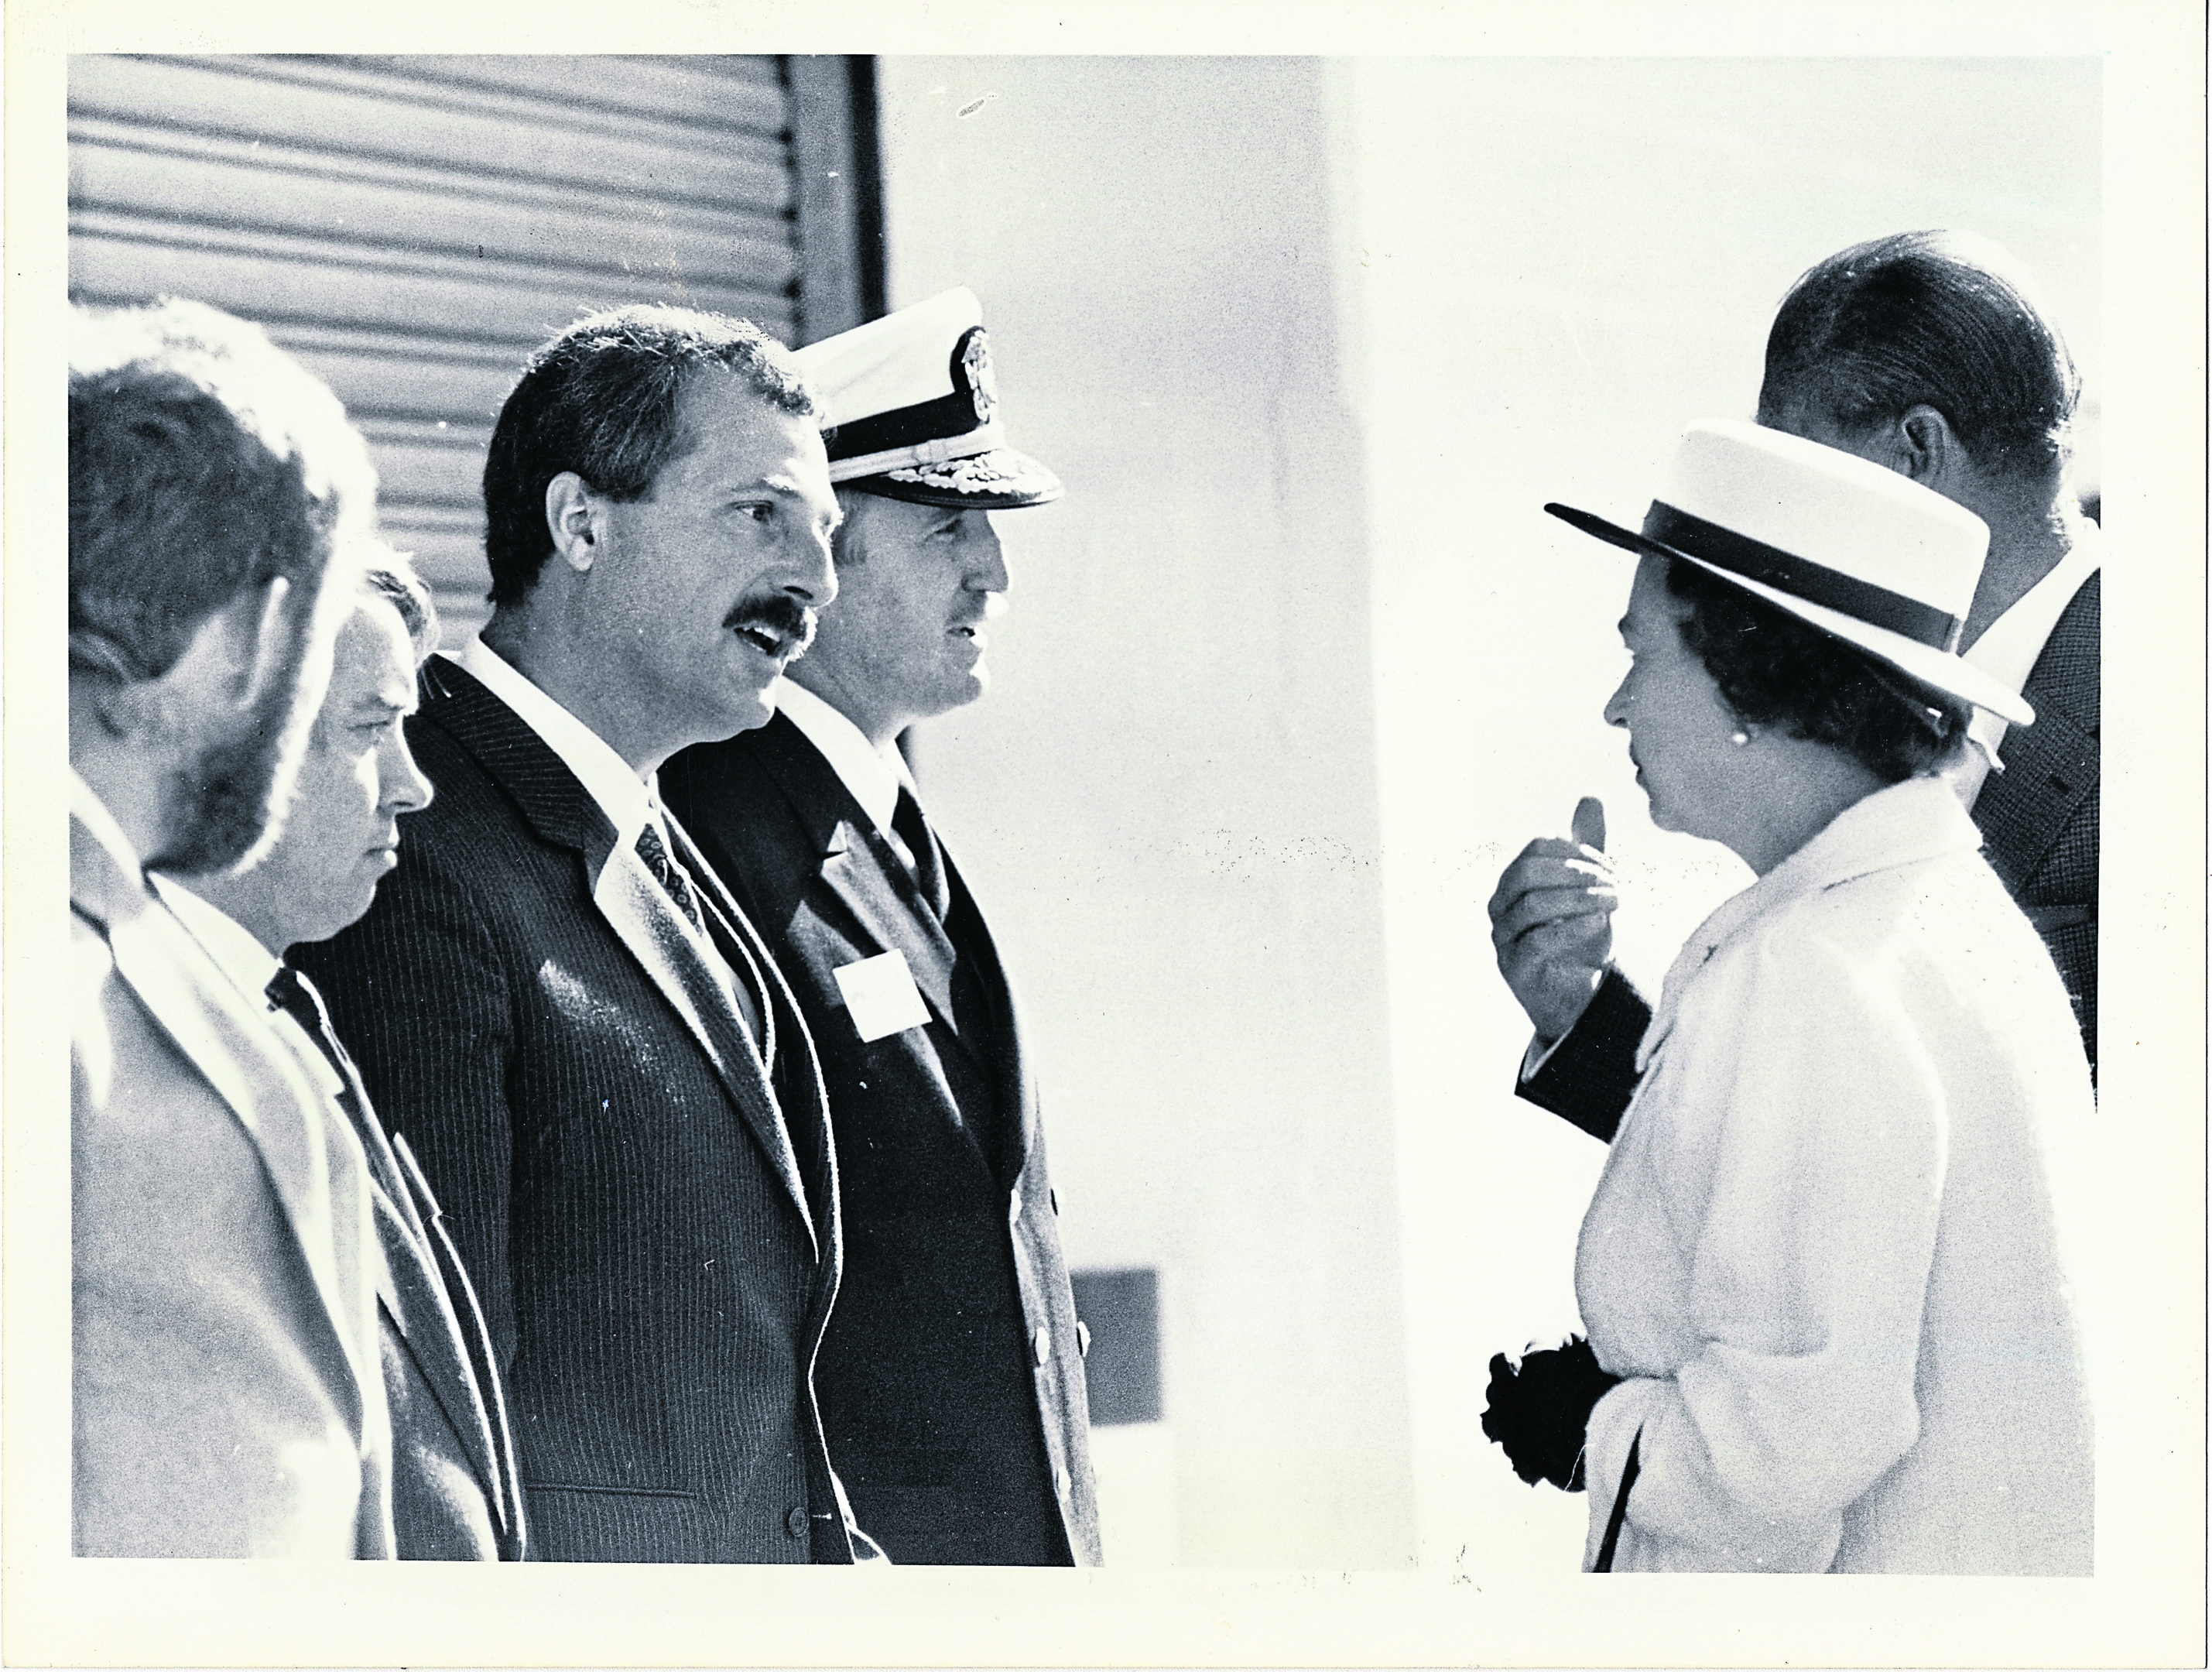 The Queen has a word with four men who had a key role in the Piper Alpha rescue operation, (left to right), Ian Letham, Captain Alistair Letty, Stan MacLeod and Admiral John Redd.